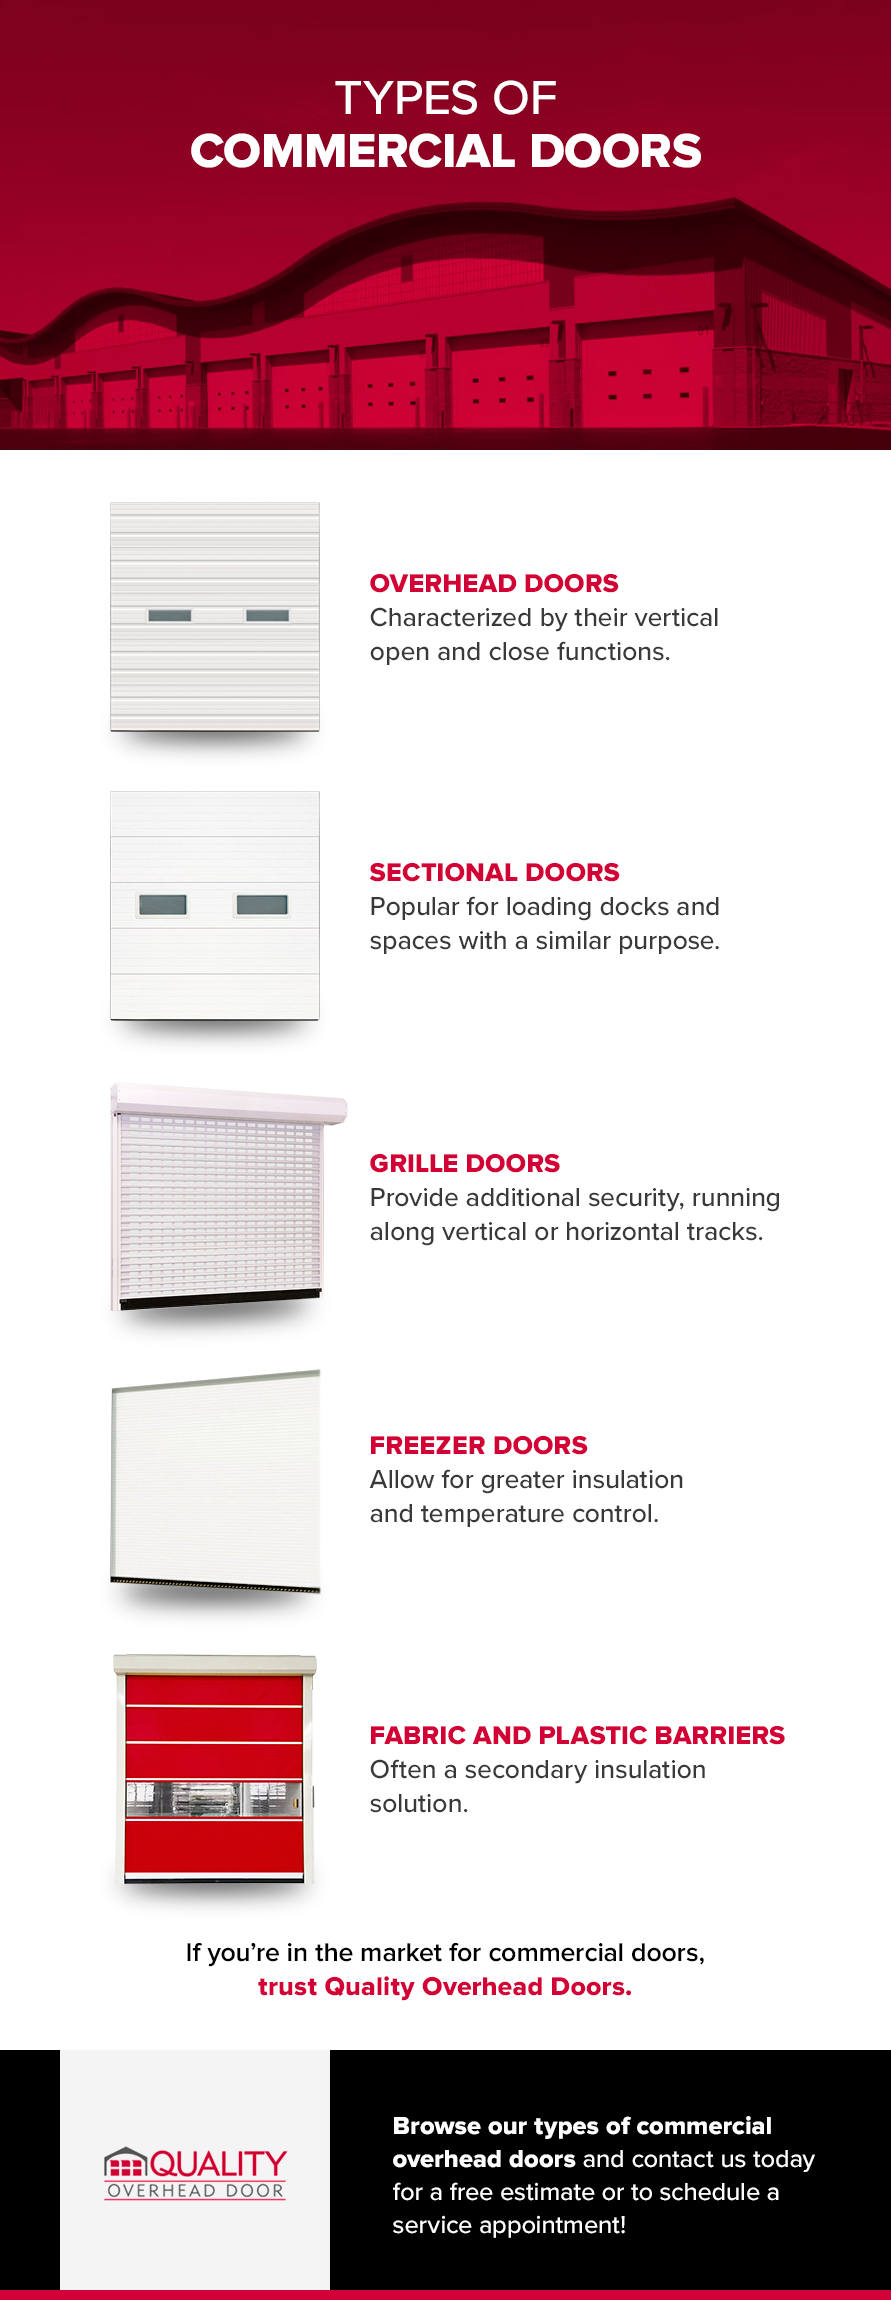 The Different Types of Commercial Doors